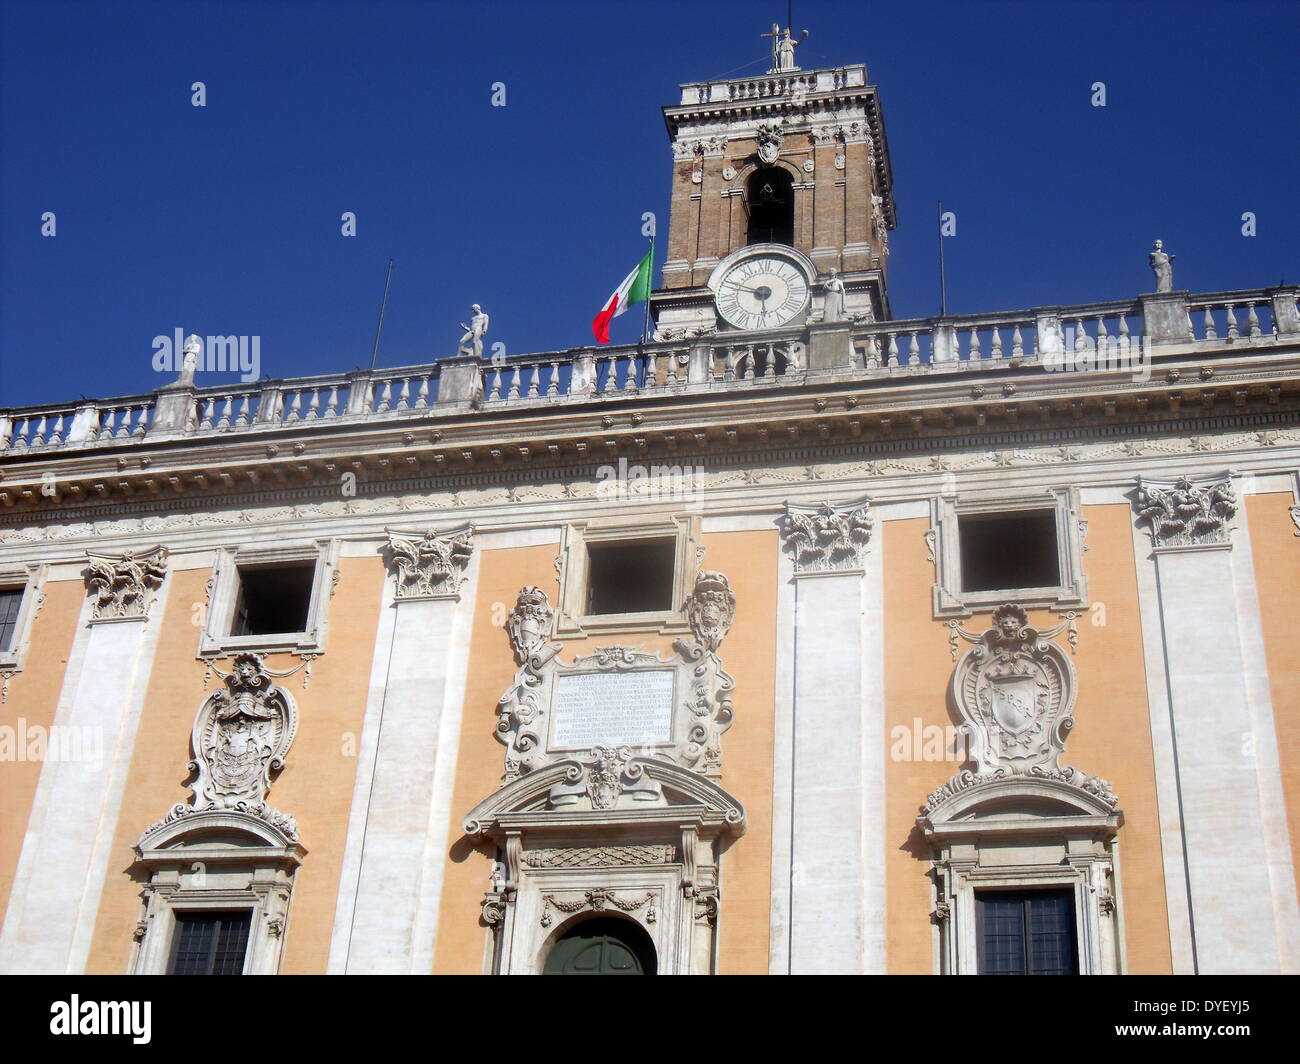 Architectural detail from the entrance/courtyard to the Capitolini museums, in Rome, Italy. The museums themselves are contained within 3 palazzi as per designs by Michelangelo Buonarroti in 1536, they were then built over a 400 year period. Stock Photo